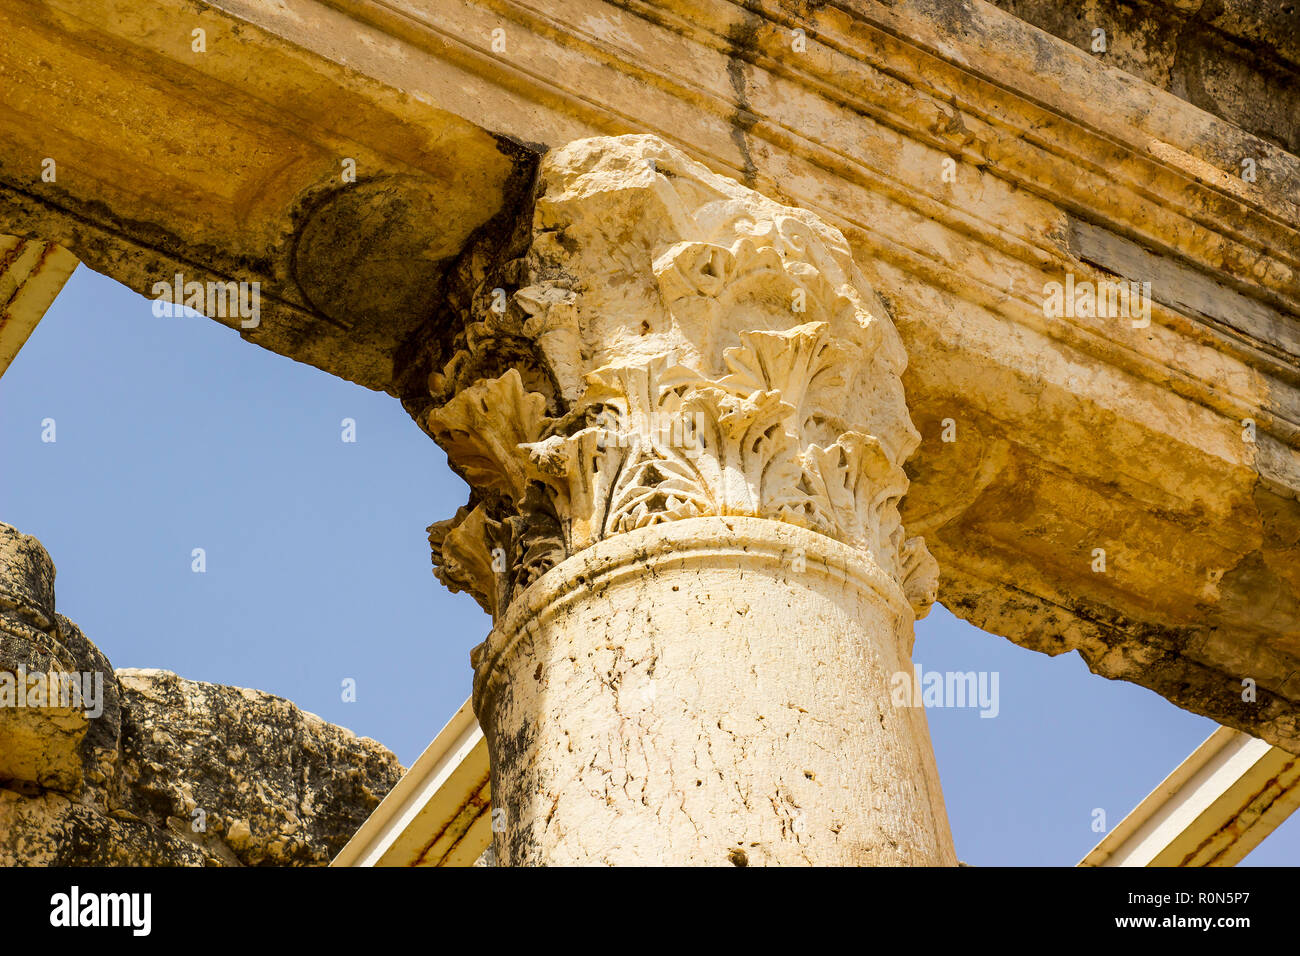 3 May 2018 A stone column among the ruins of a first century Jewish Synagogue in the ancient town of Capernaum in Israel where Jesus lived for some ti Stock Photo